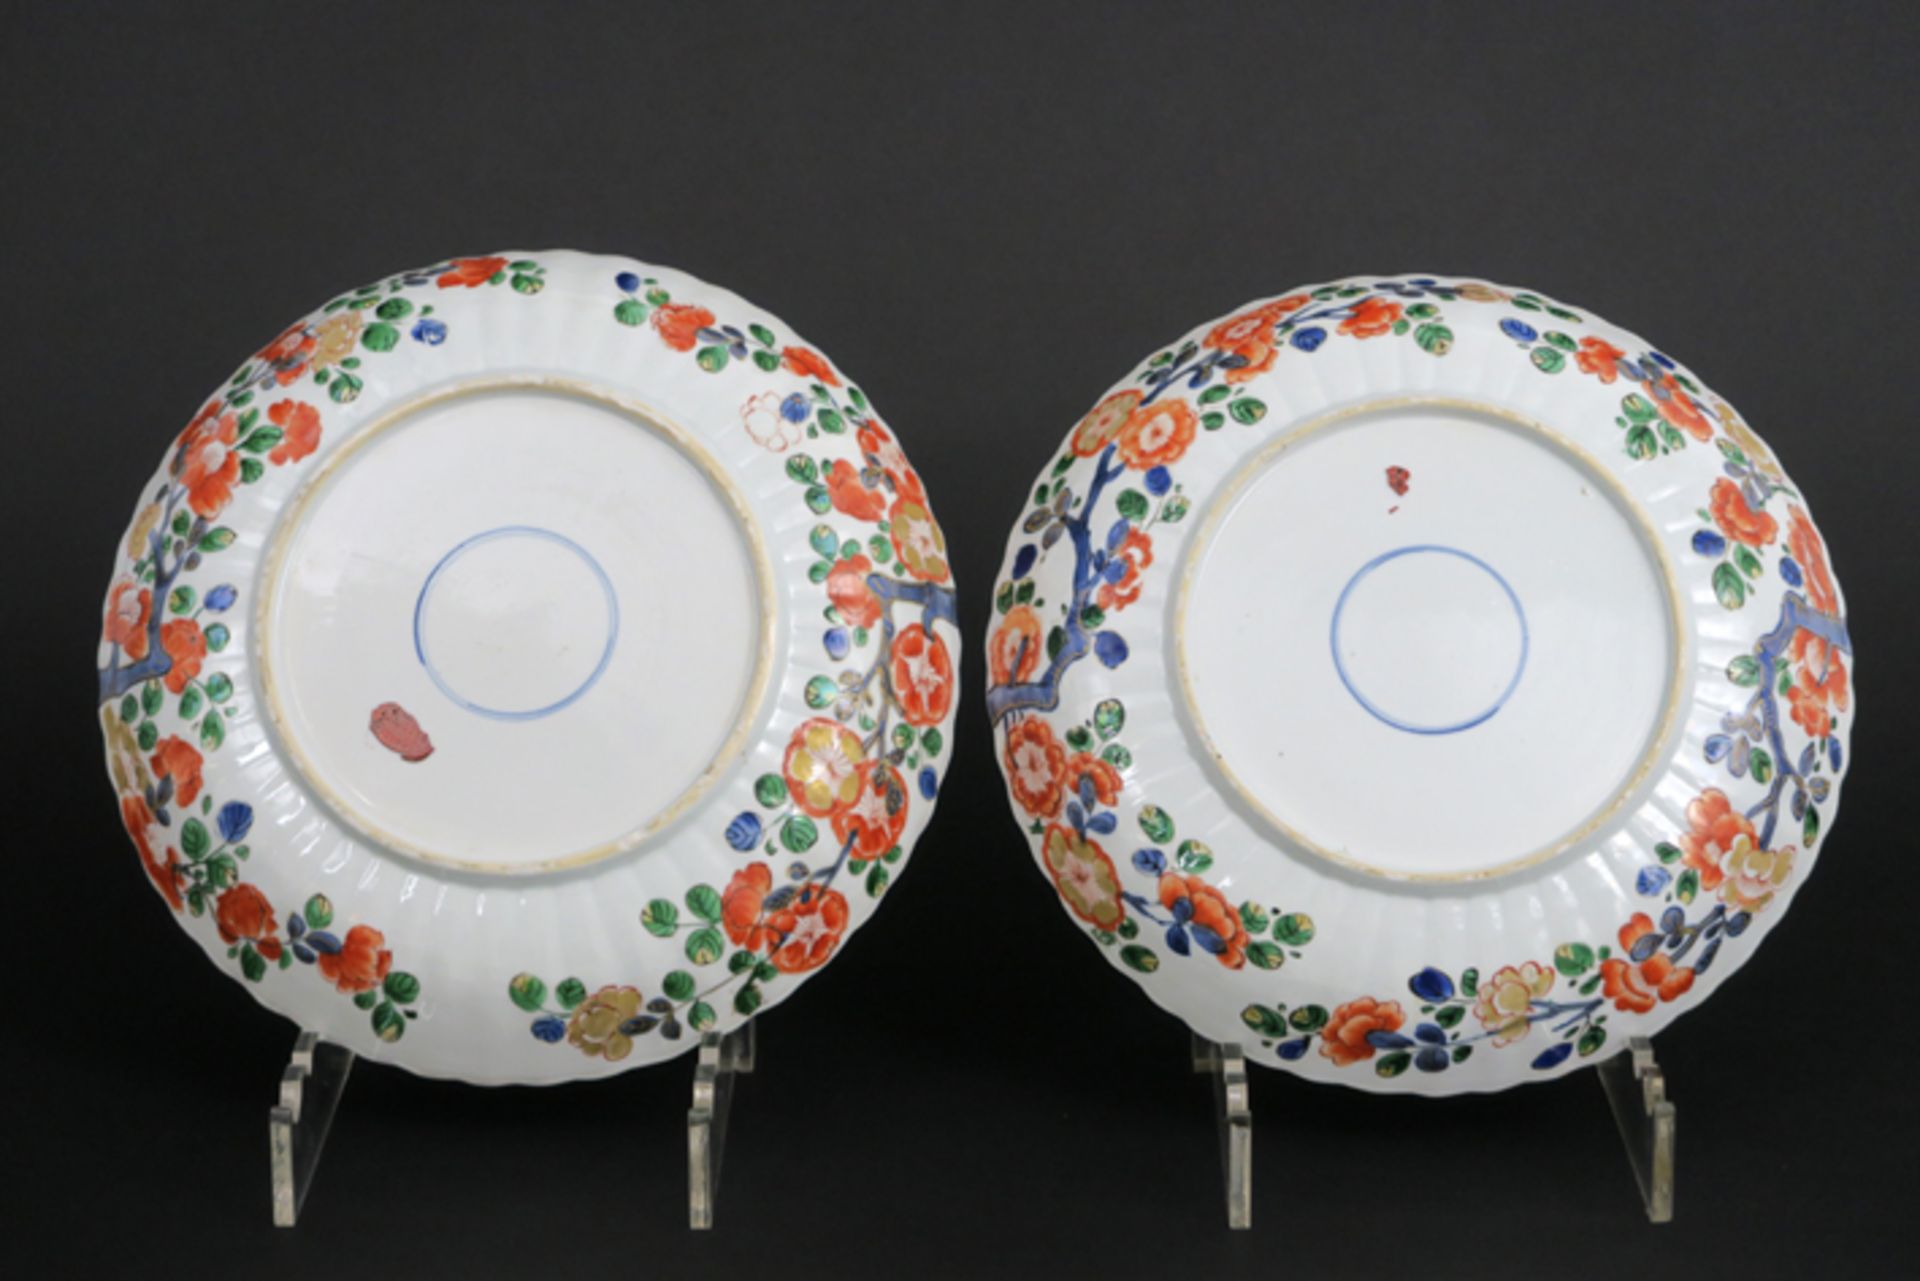 pair of 17th/18th Cent. Chinese Kang Xi dishes in porcelain with Famille Verte decor [...] - Image 2 of 2